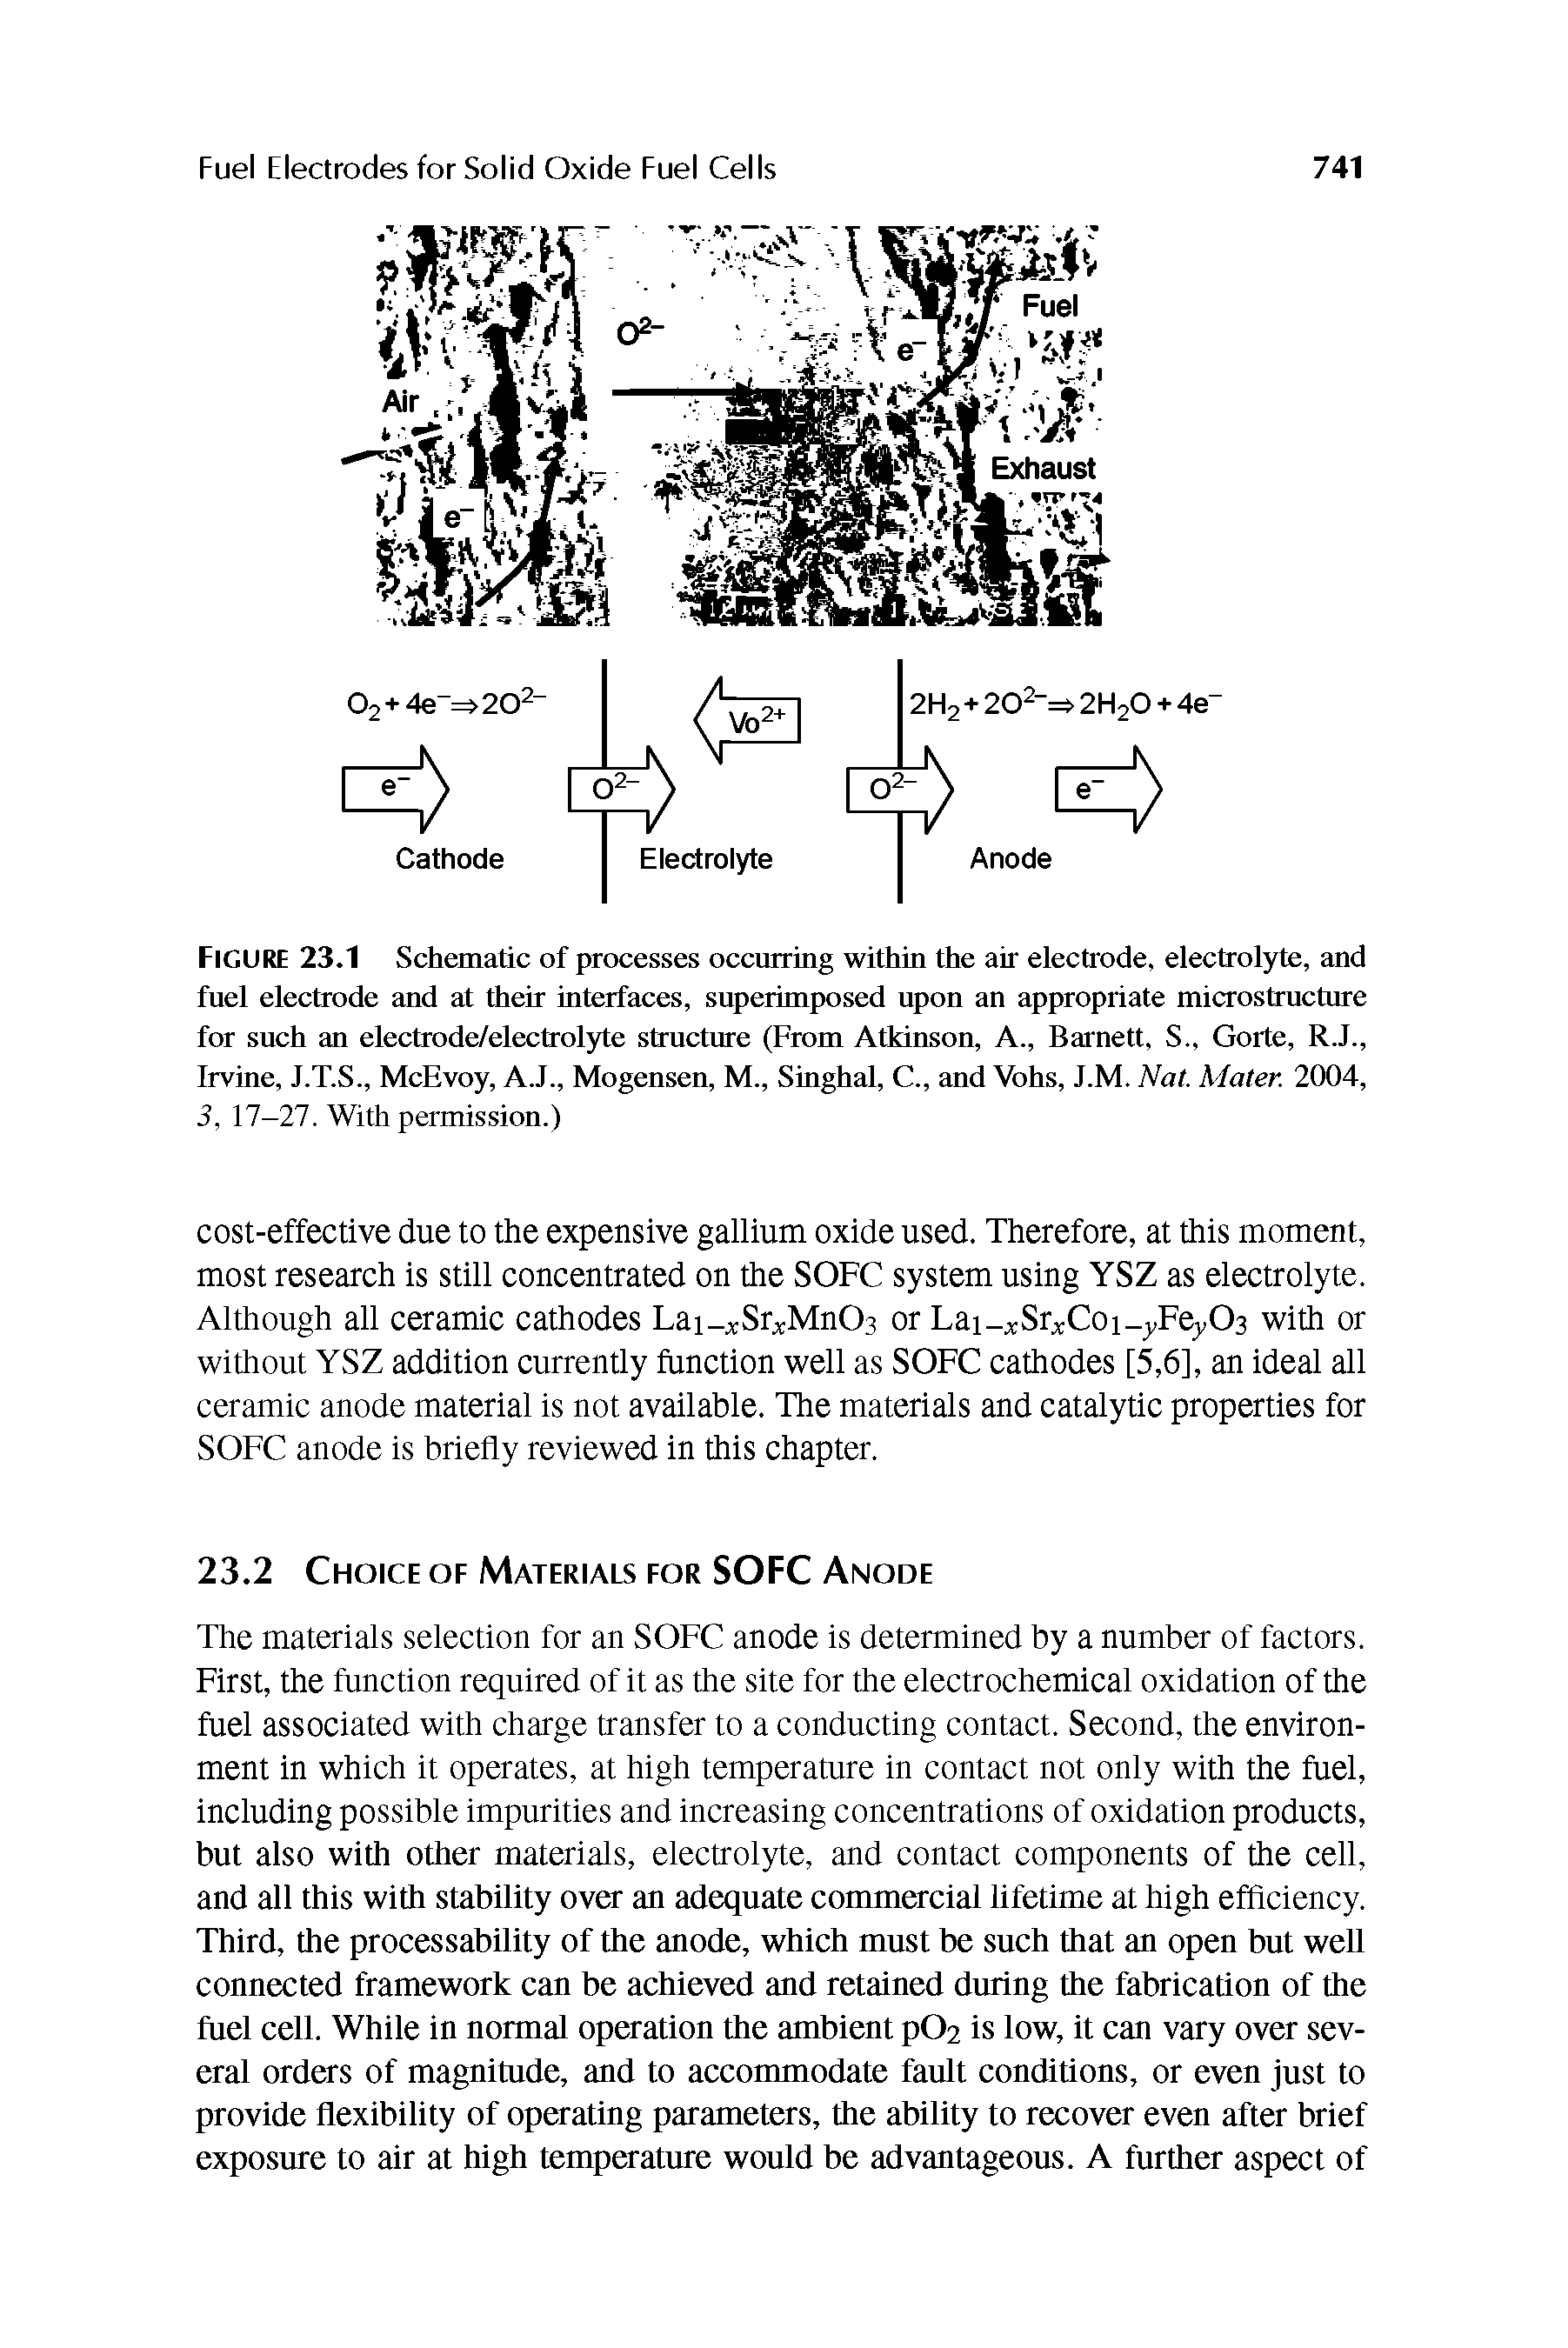 Figure 23.1 Schematic of processes occurring within the air electrode, electrolyte, and fuel electrode and at their interfaces, superimposed upon an appropriate microstructure for such an electrode/electrol5de structure (From Atkinson, A., Barnett, S., Gorte, R.J., Irvine, J.T.S., McEvoy, A.J., Mogensen, M., Singhal, C., and Vohs, J.M. Nat. Mater. 2004, 3, 17-27. With permission.)...